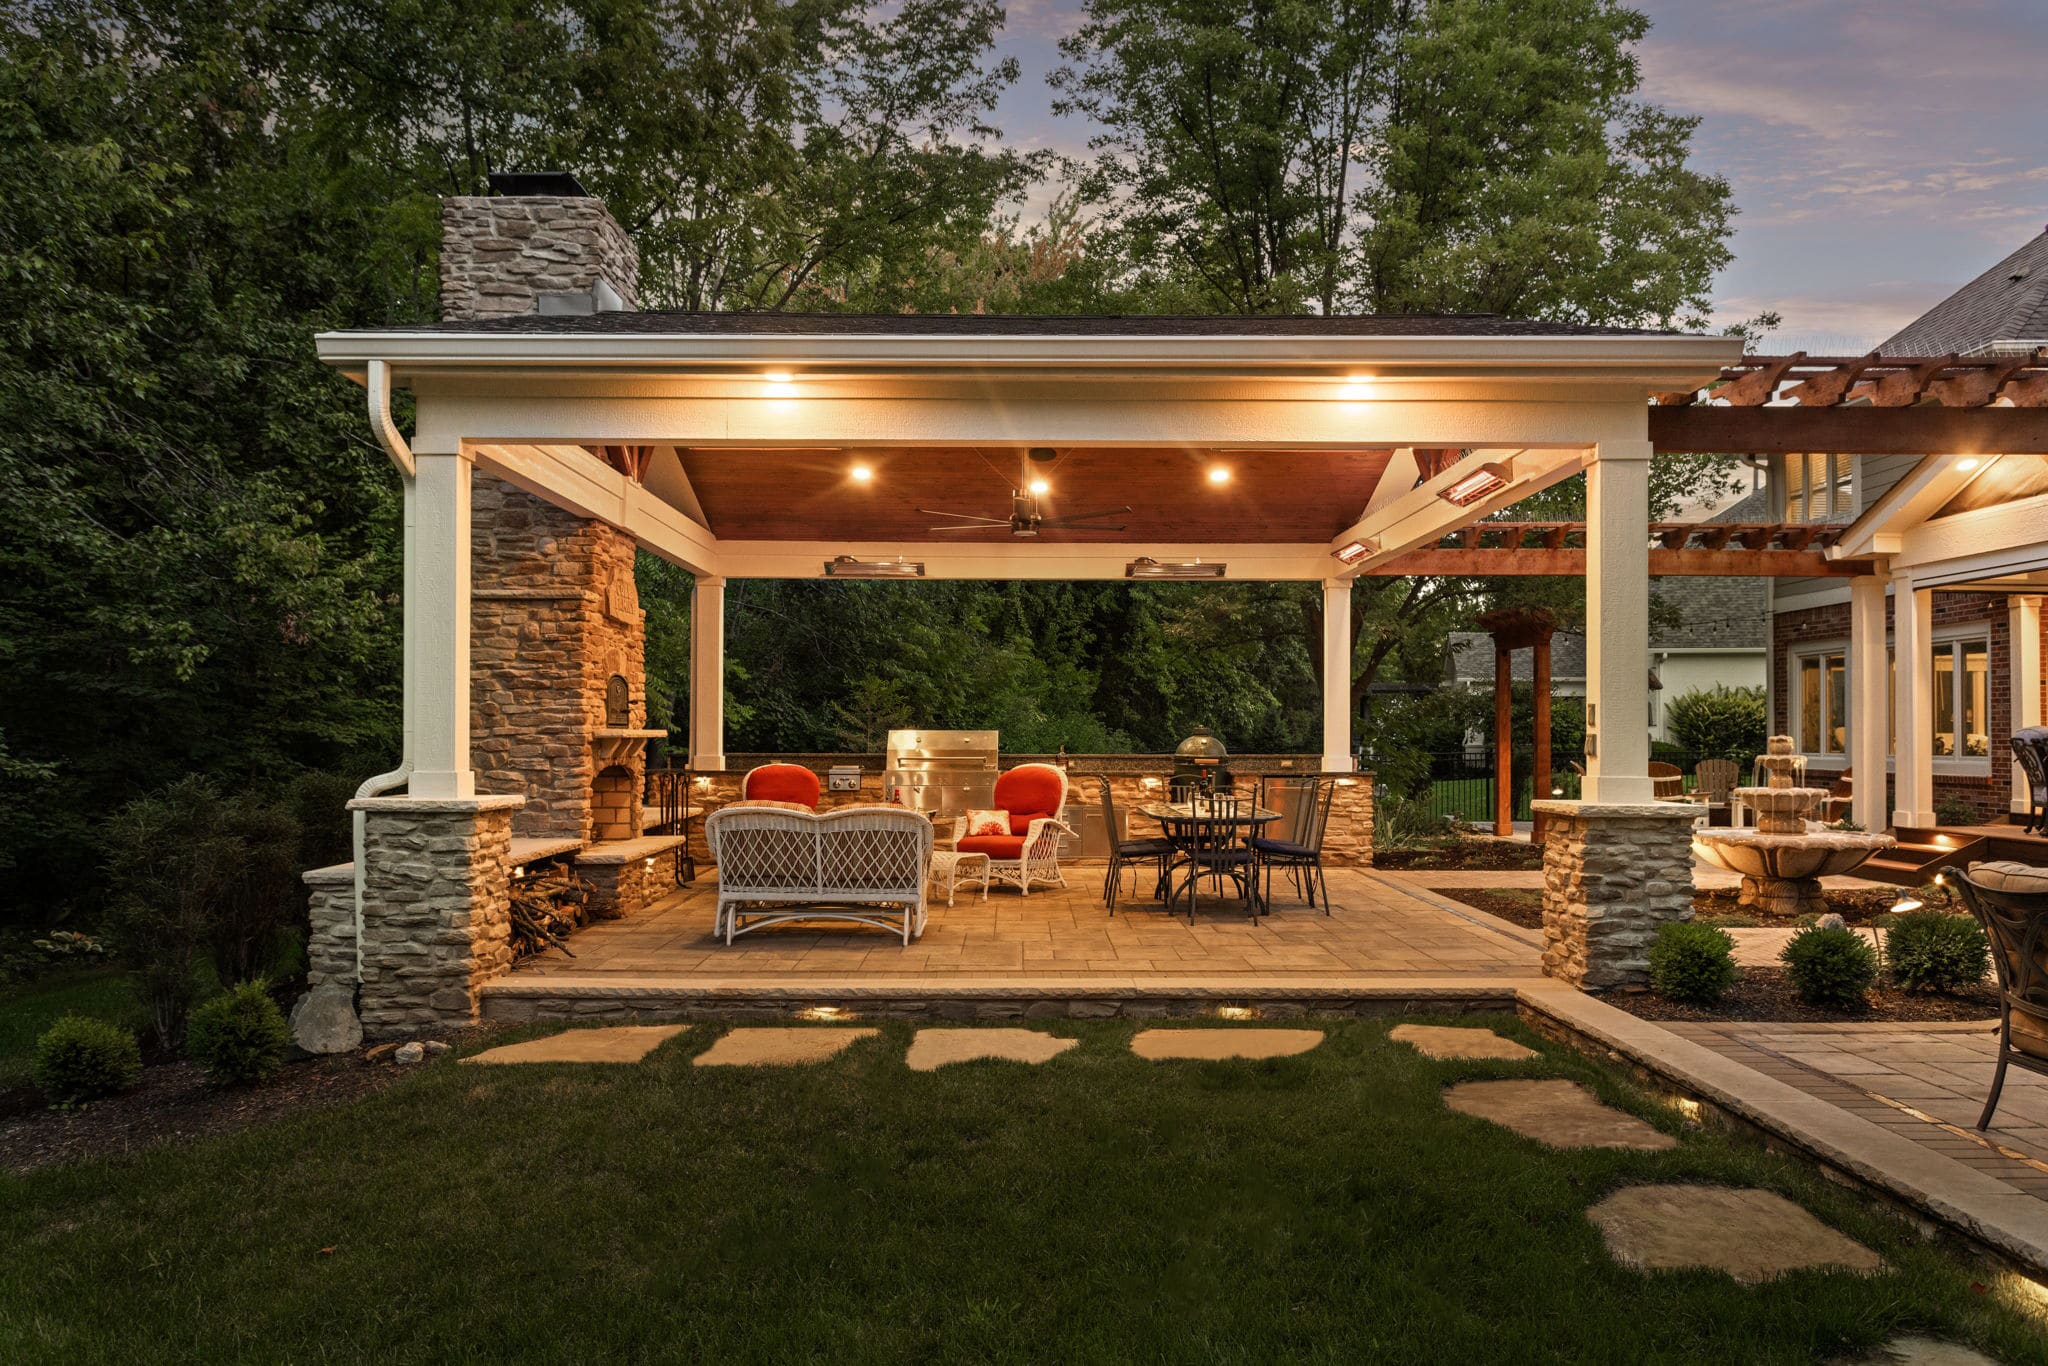 Landscape Design Featuring Fire Feature, Pavers, and Covered Outdoor Structure in Carmel Indiana